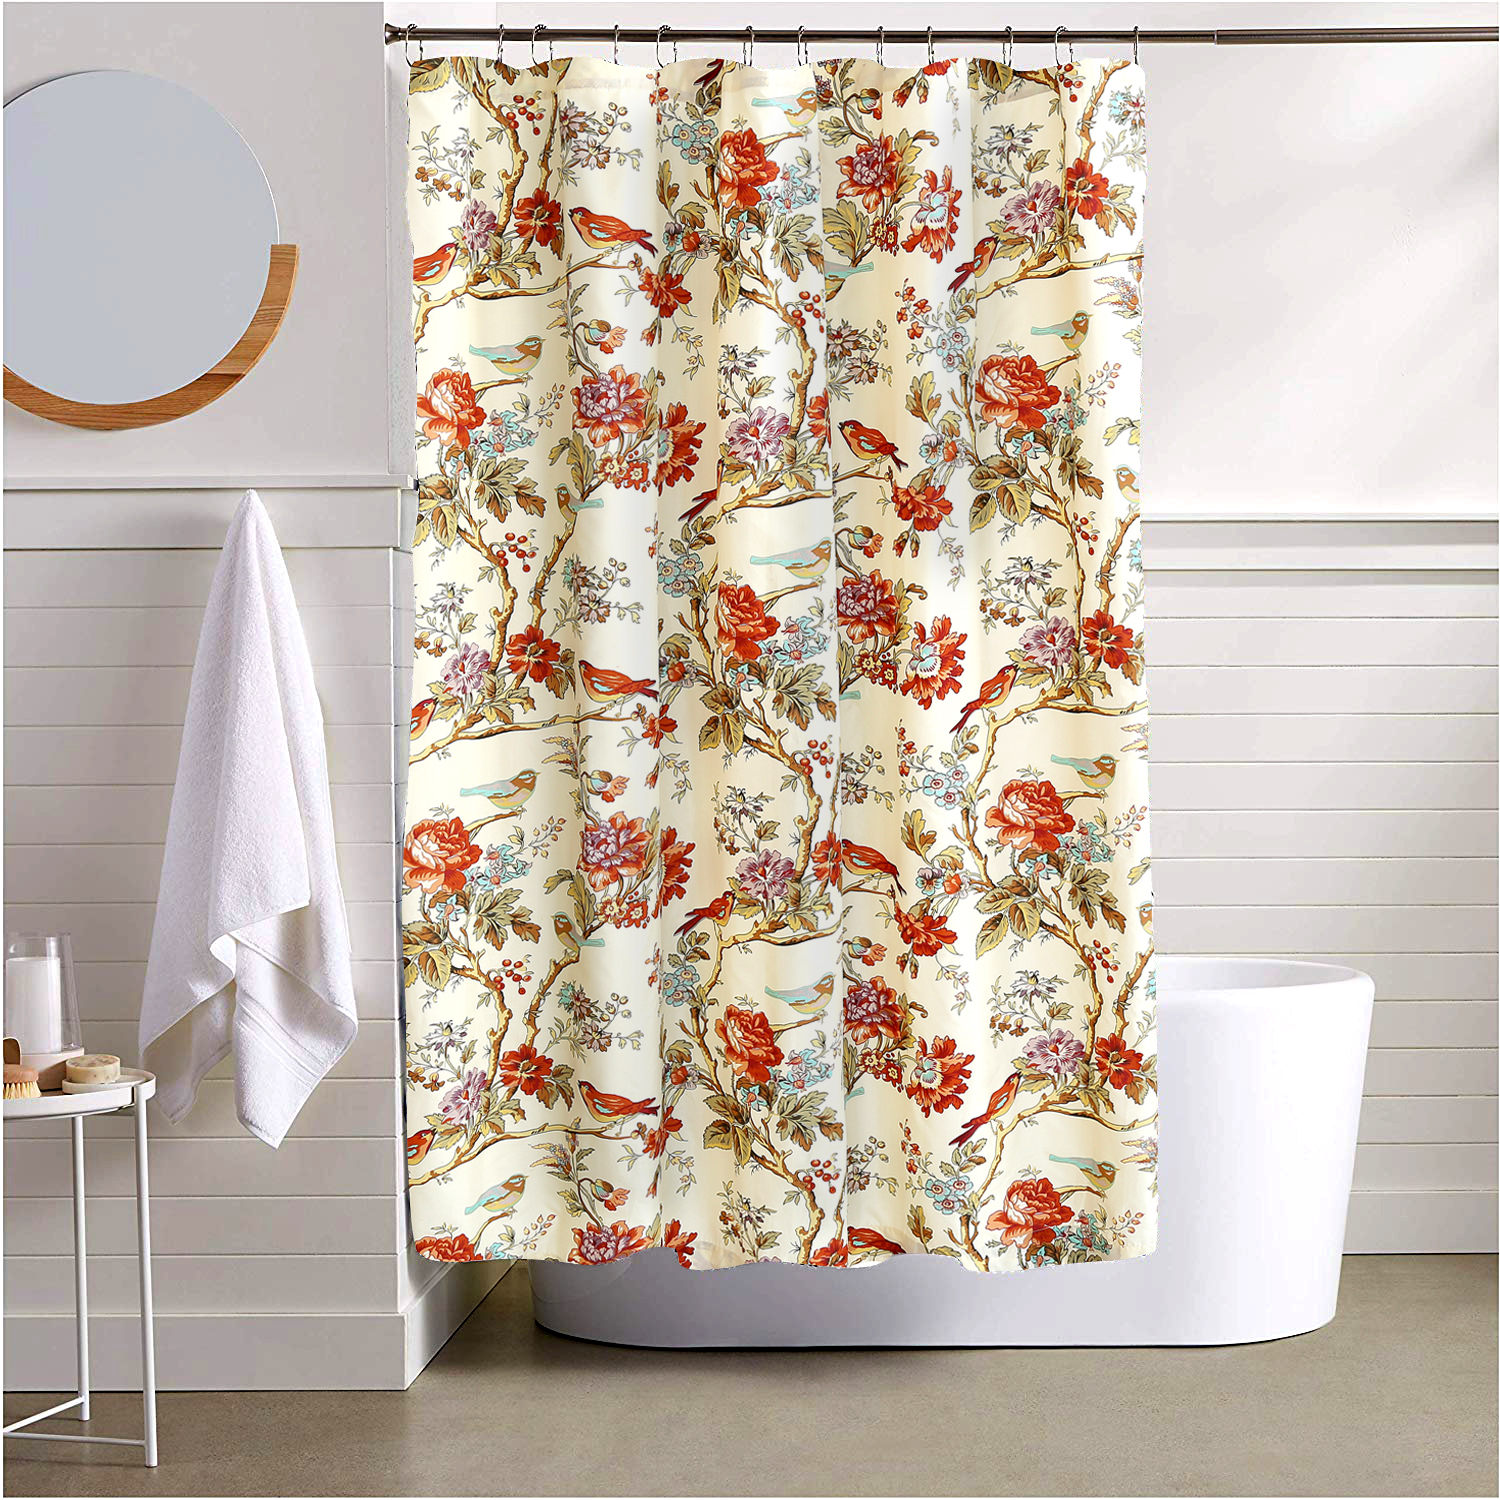 Finch Orchard Shower Curtain 72"W x 72"L